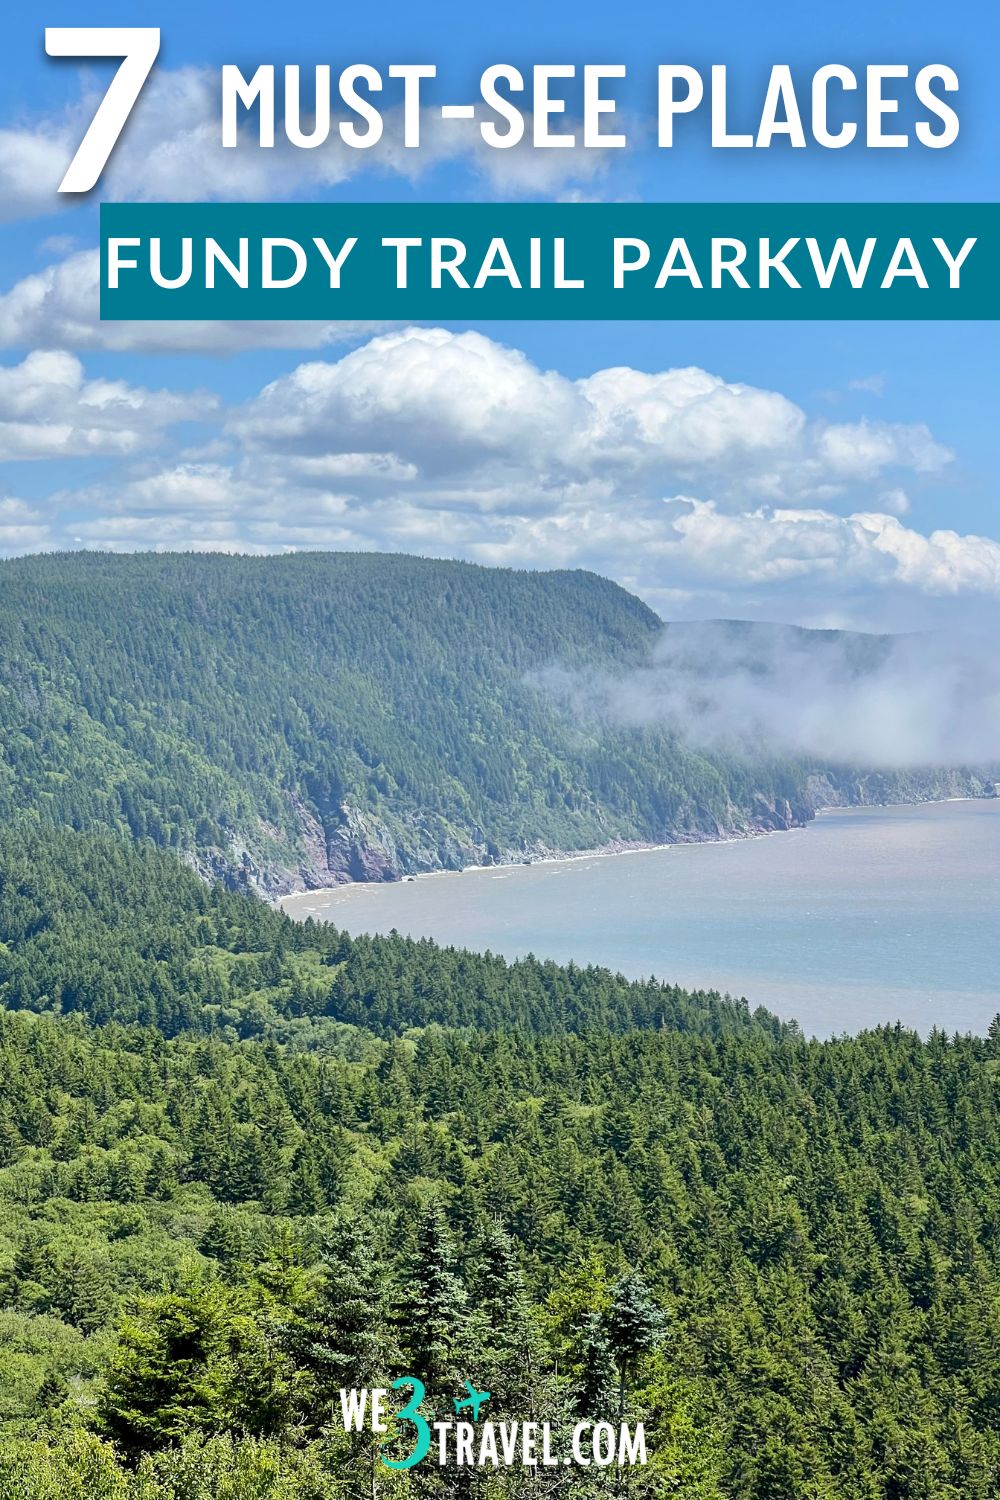 Must See Places on the Fundy Trail Parkway